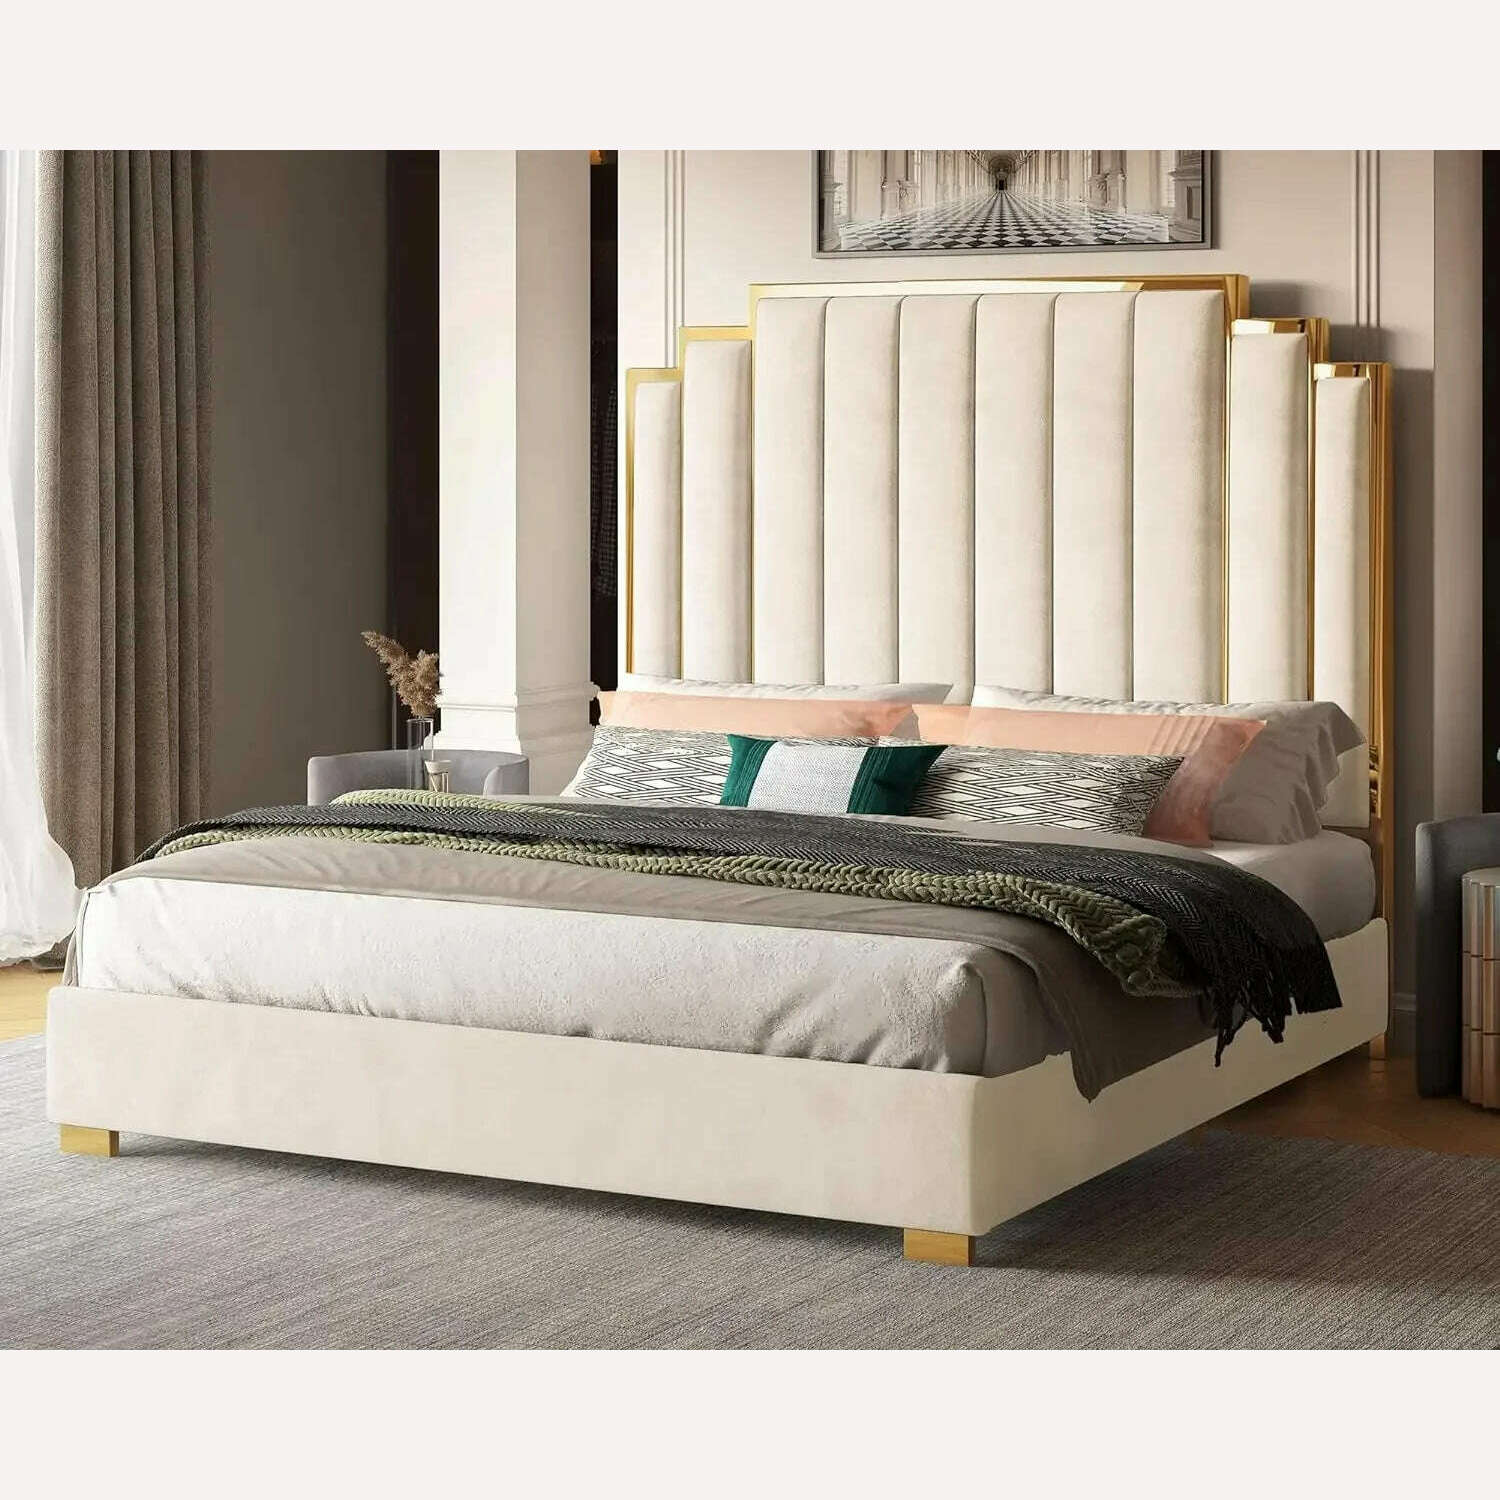 KIMLUD, Queen Size Bed Frame, 61.4" Velvet Upholstered Beds with Gold Trim Headboard/No Box Spring Needed, Queen Size Bed Frame, Cream / United States / King, KIMLUD Womens Clothes